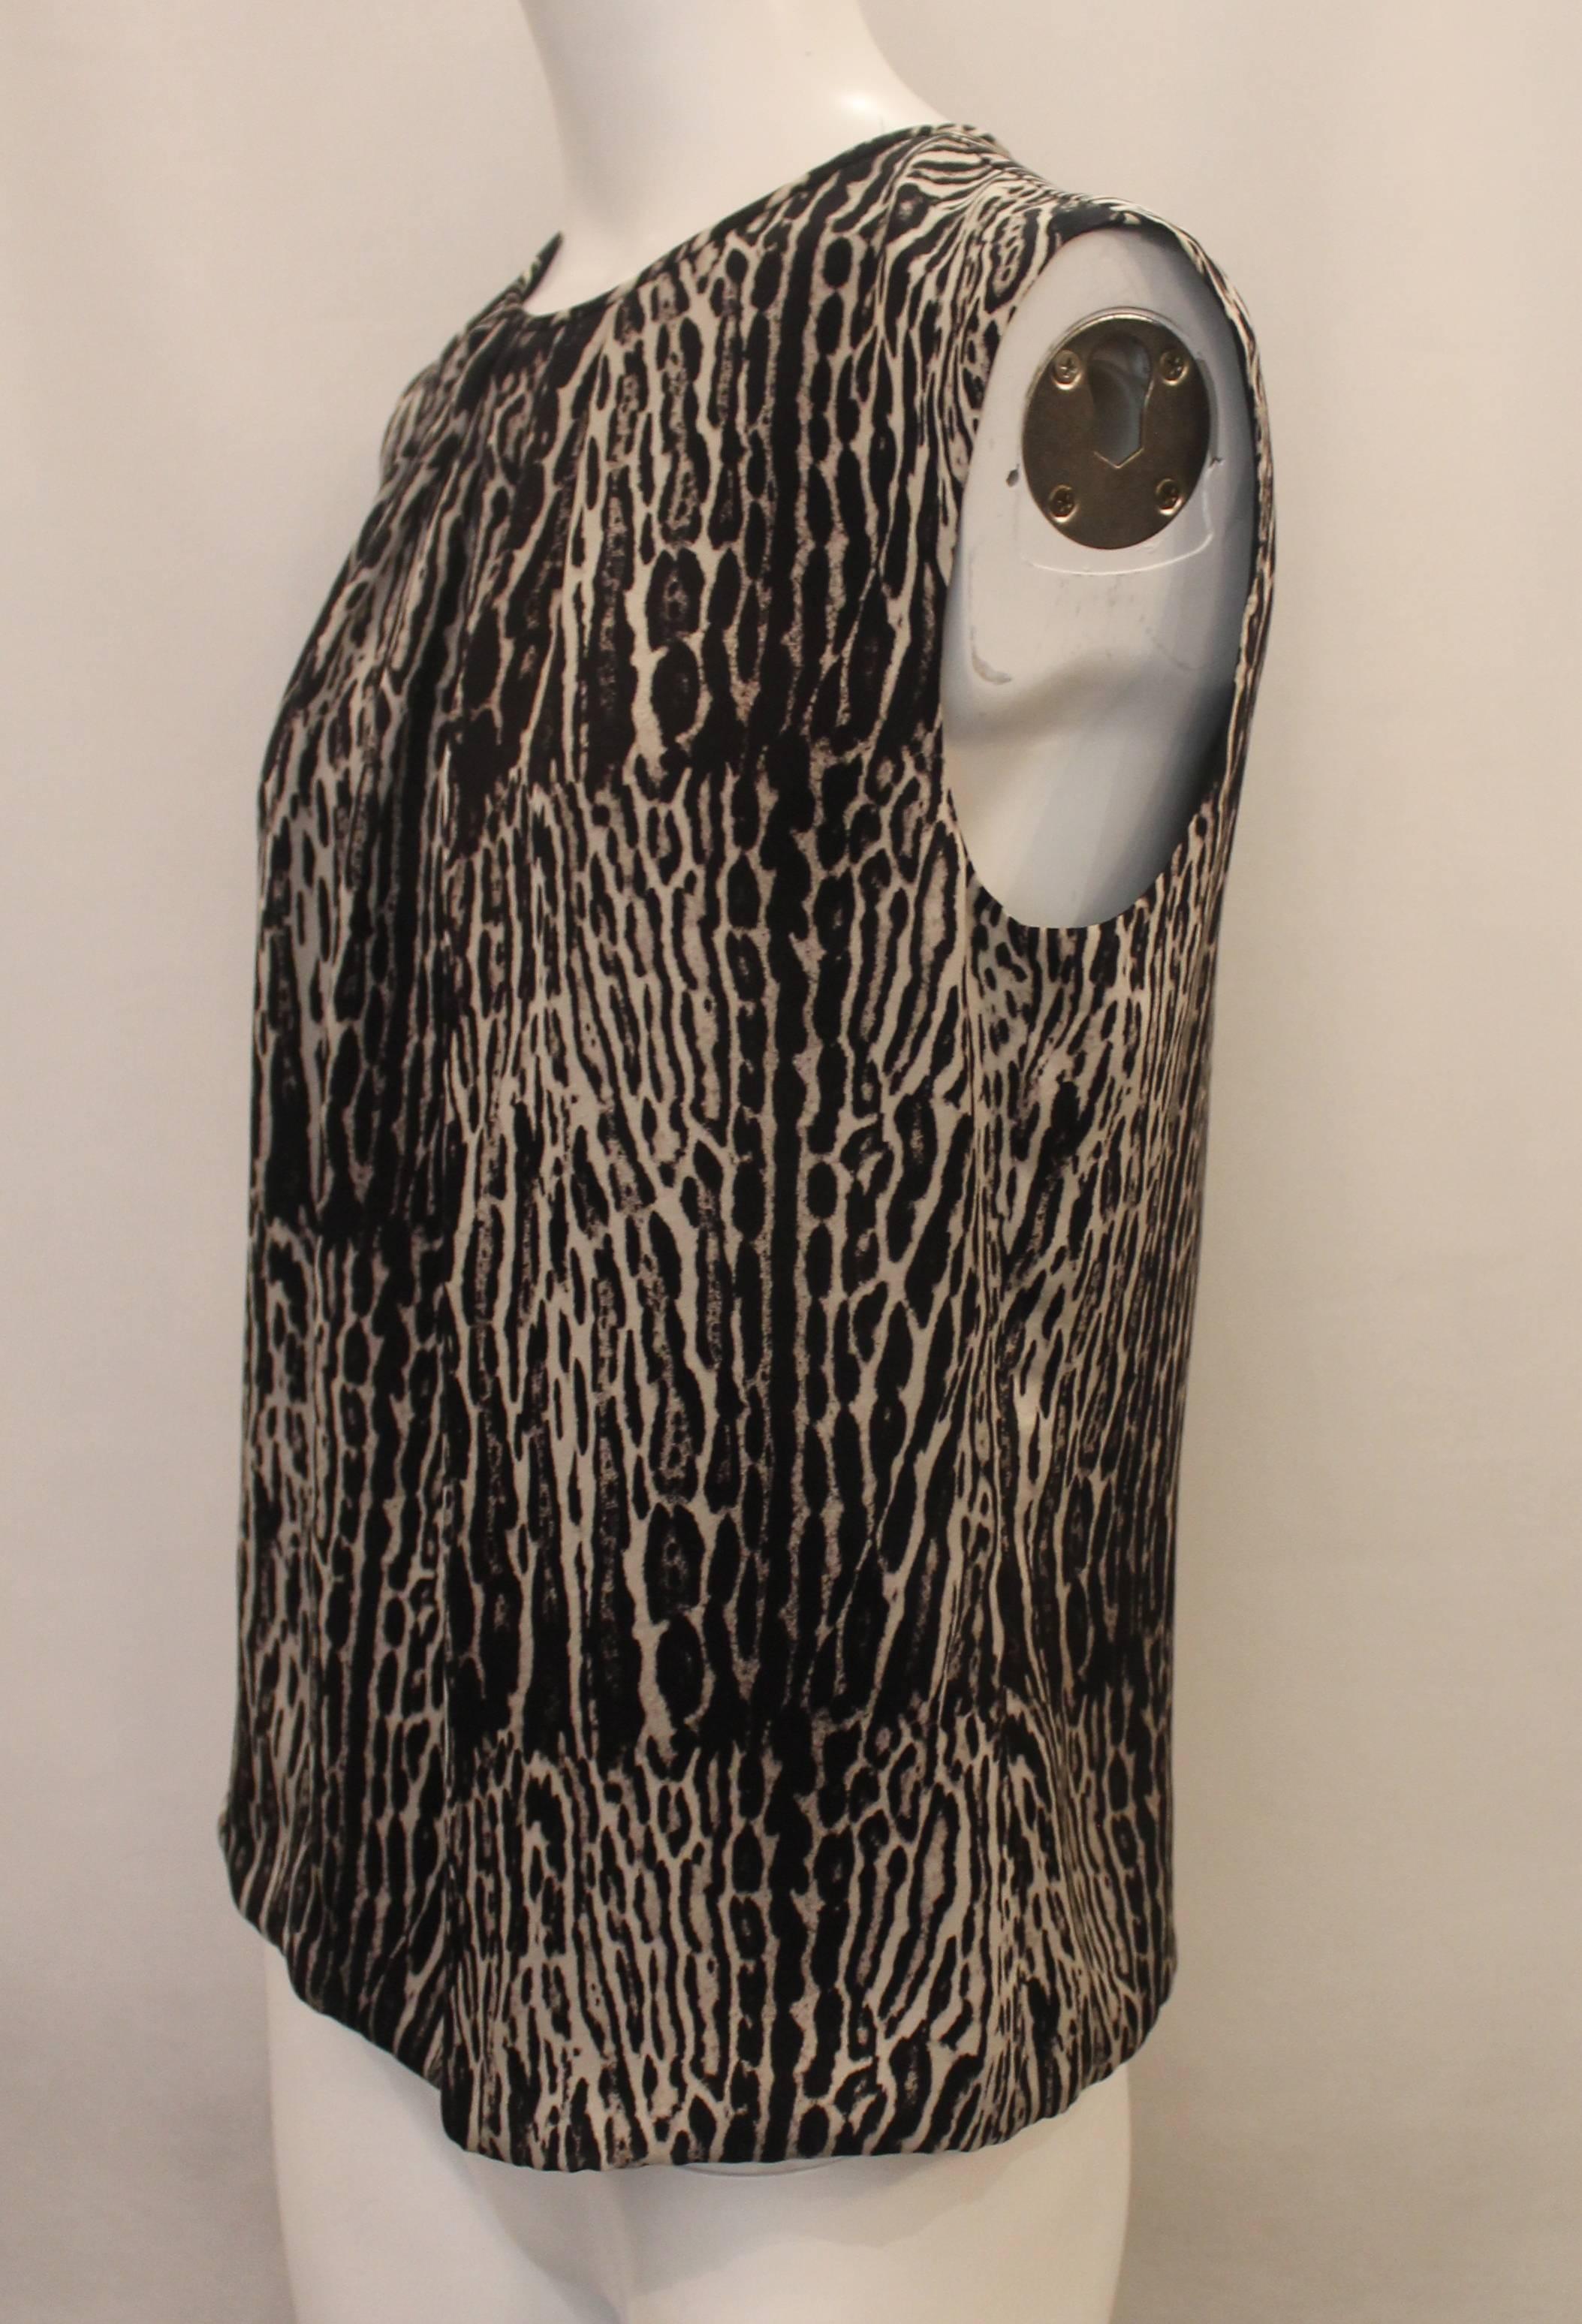 Giambattista Valli Grey & Black Silk Animal Print Top - 44. This blouse is in excellent condition with very light wear. This flowy top features slight pleats at the neckline and a back zipper.

Measurements:
Bust- 41